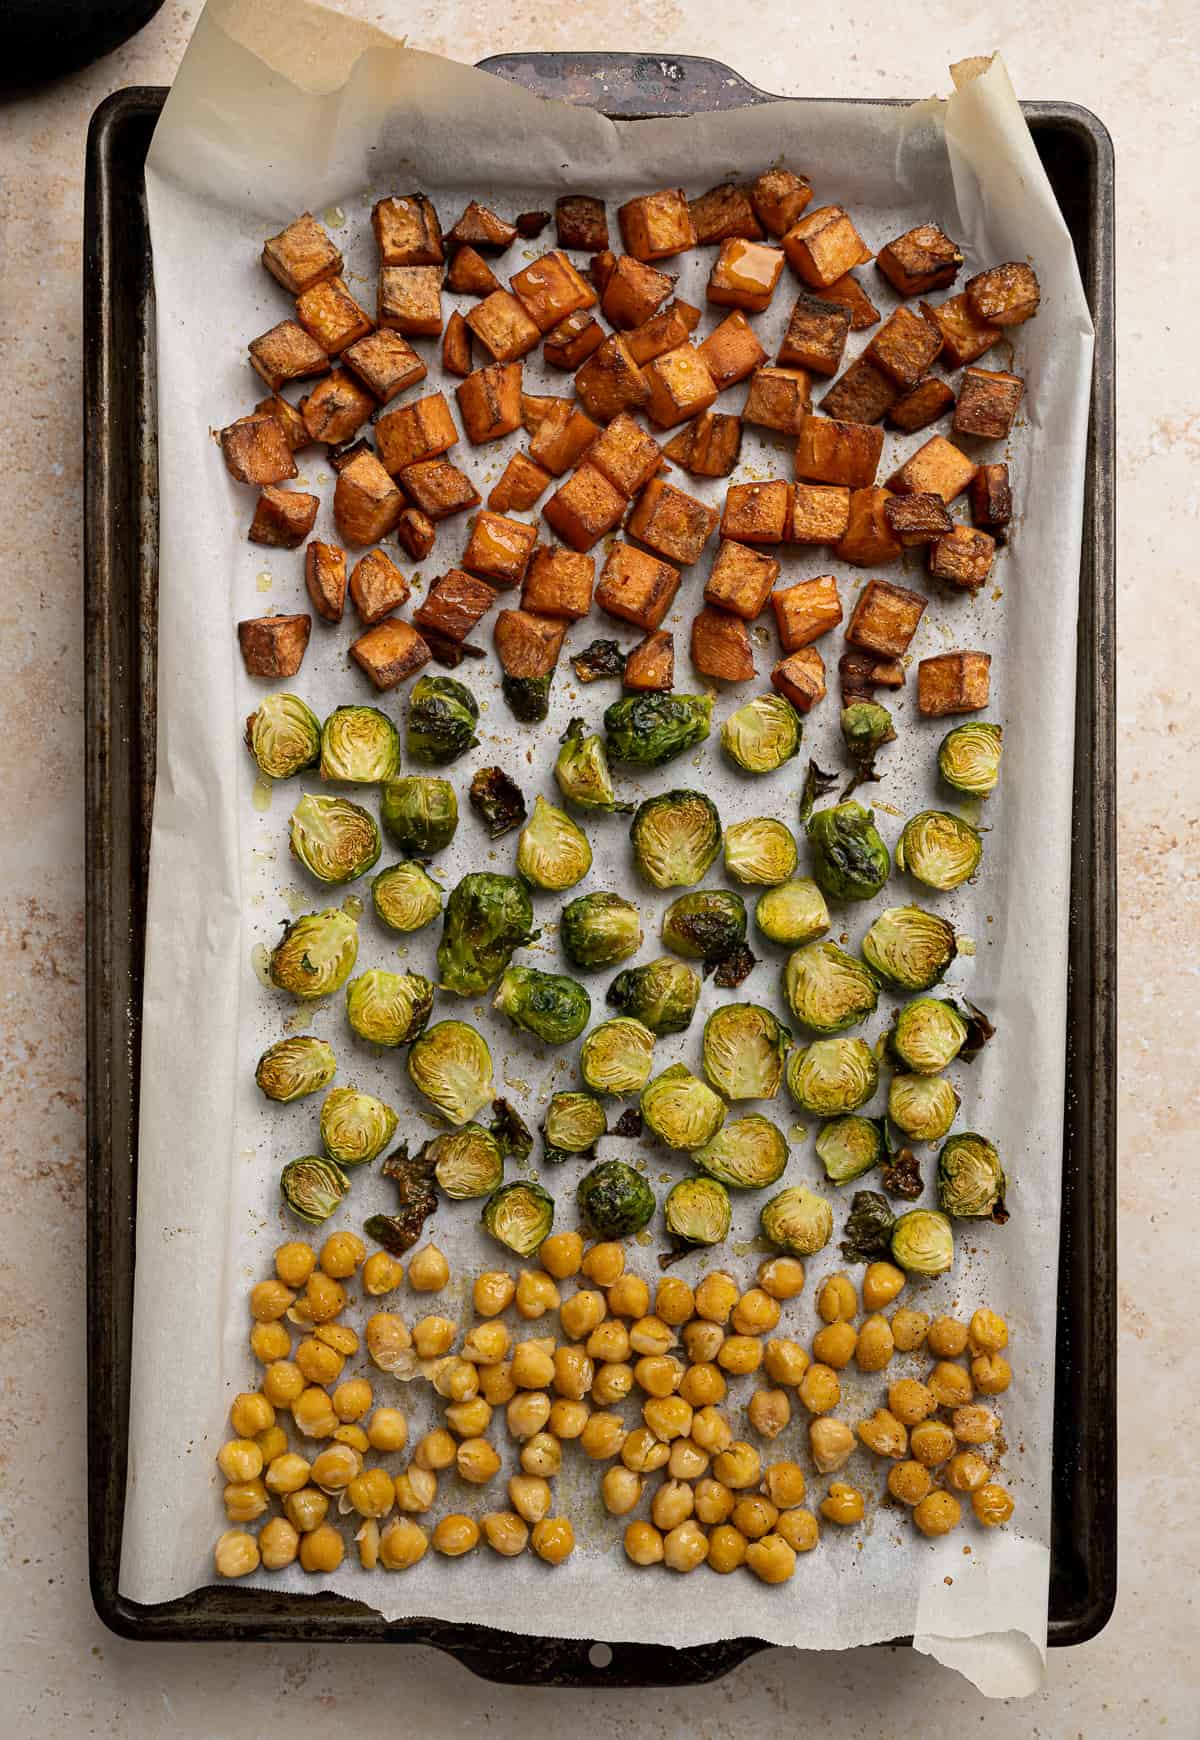 roasted sweet potatoes, brussel sprouts, and chickpeas on a baking sheet.